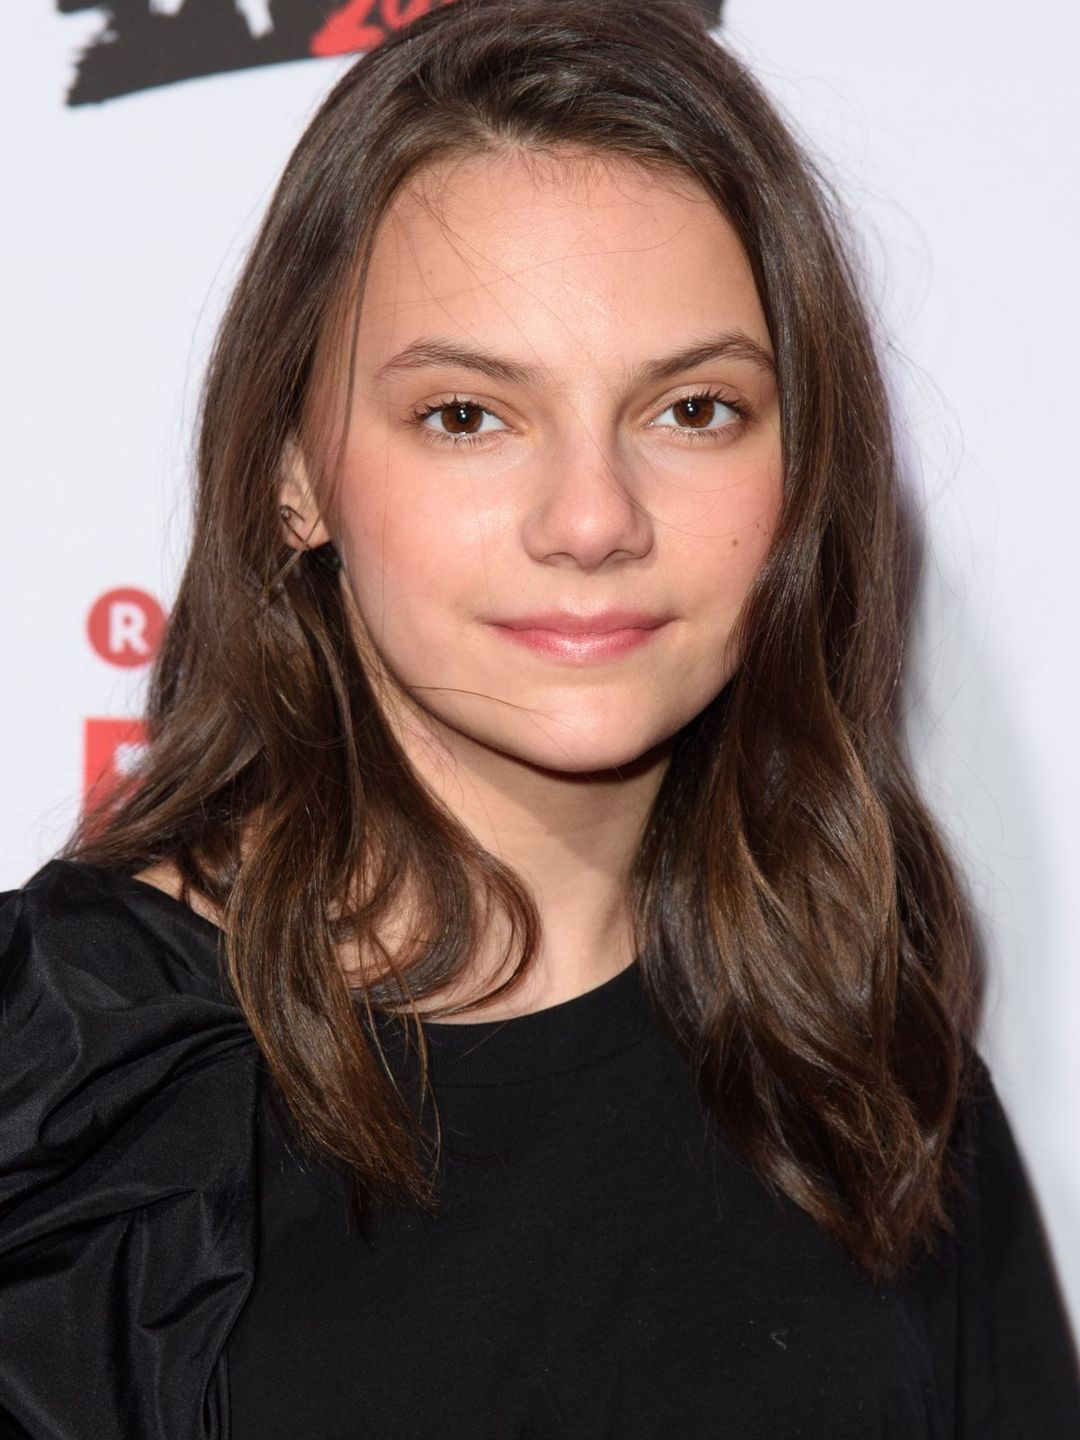 Dafne Keen place of birth